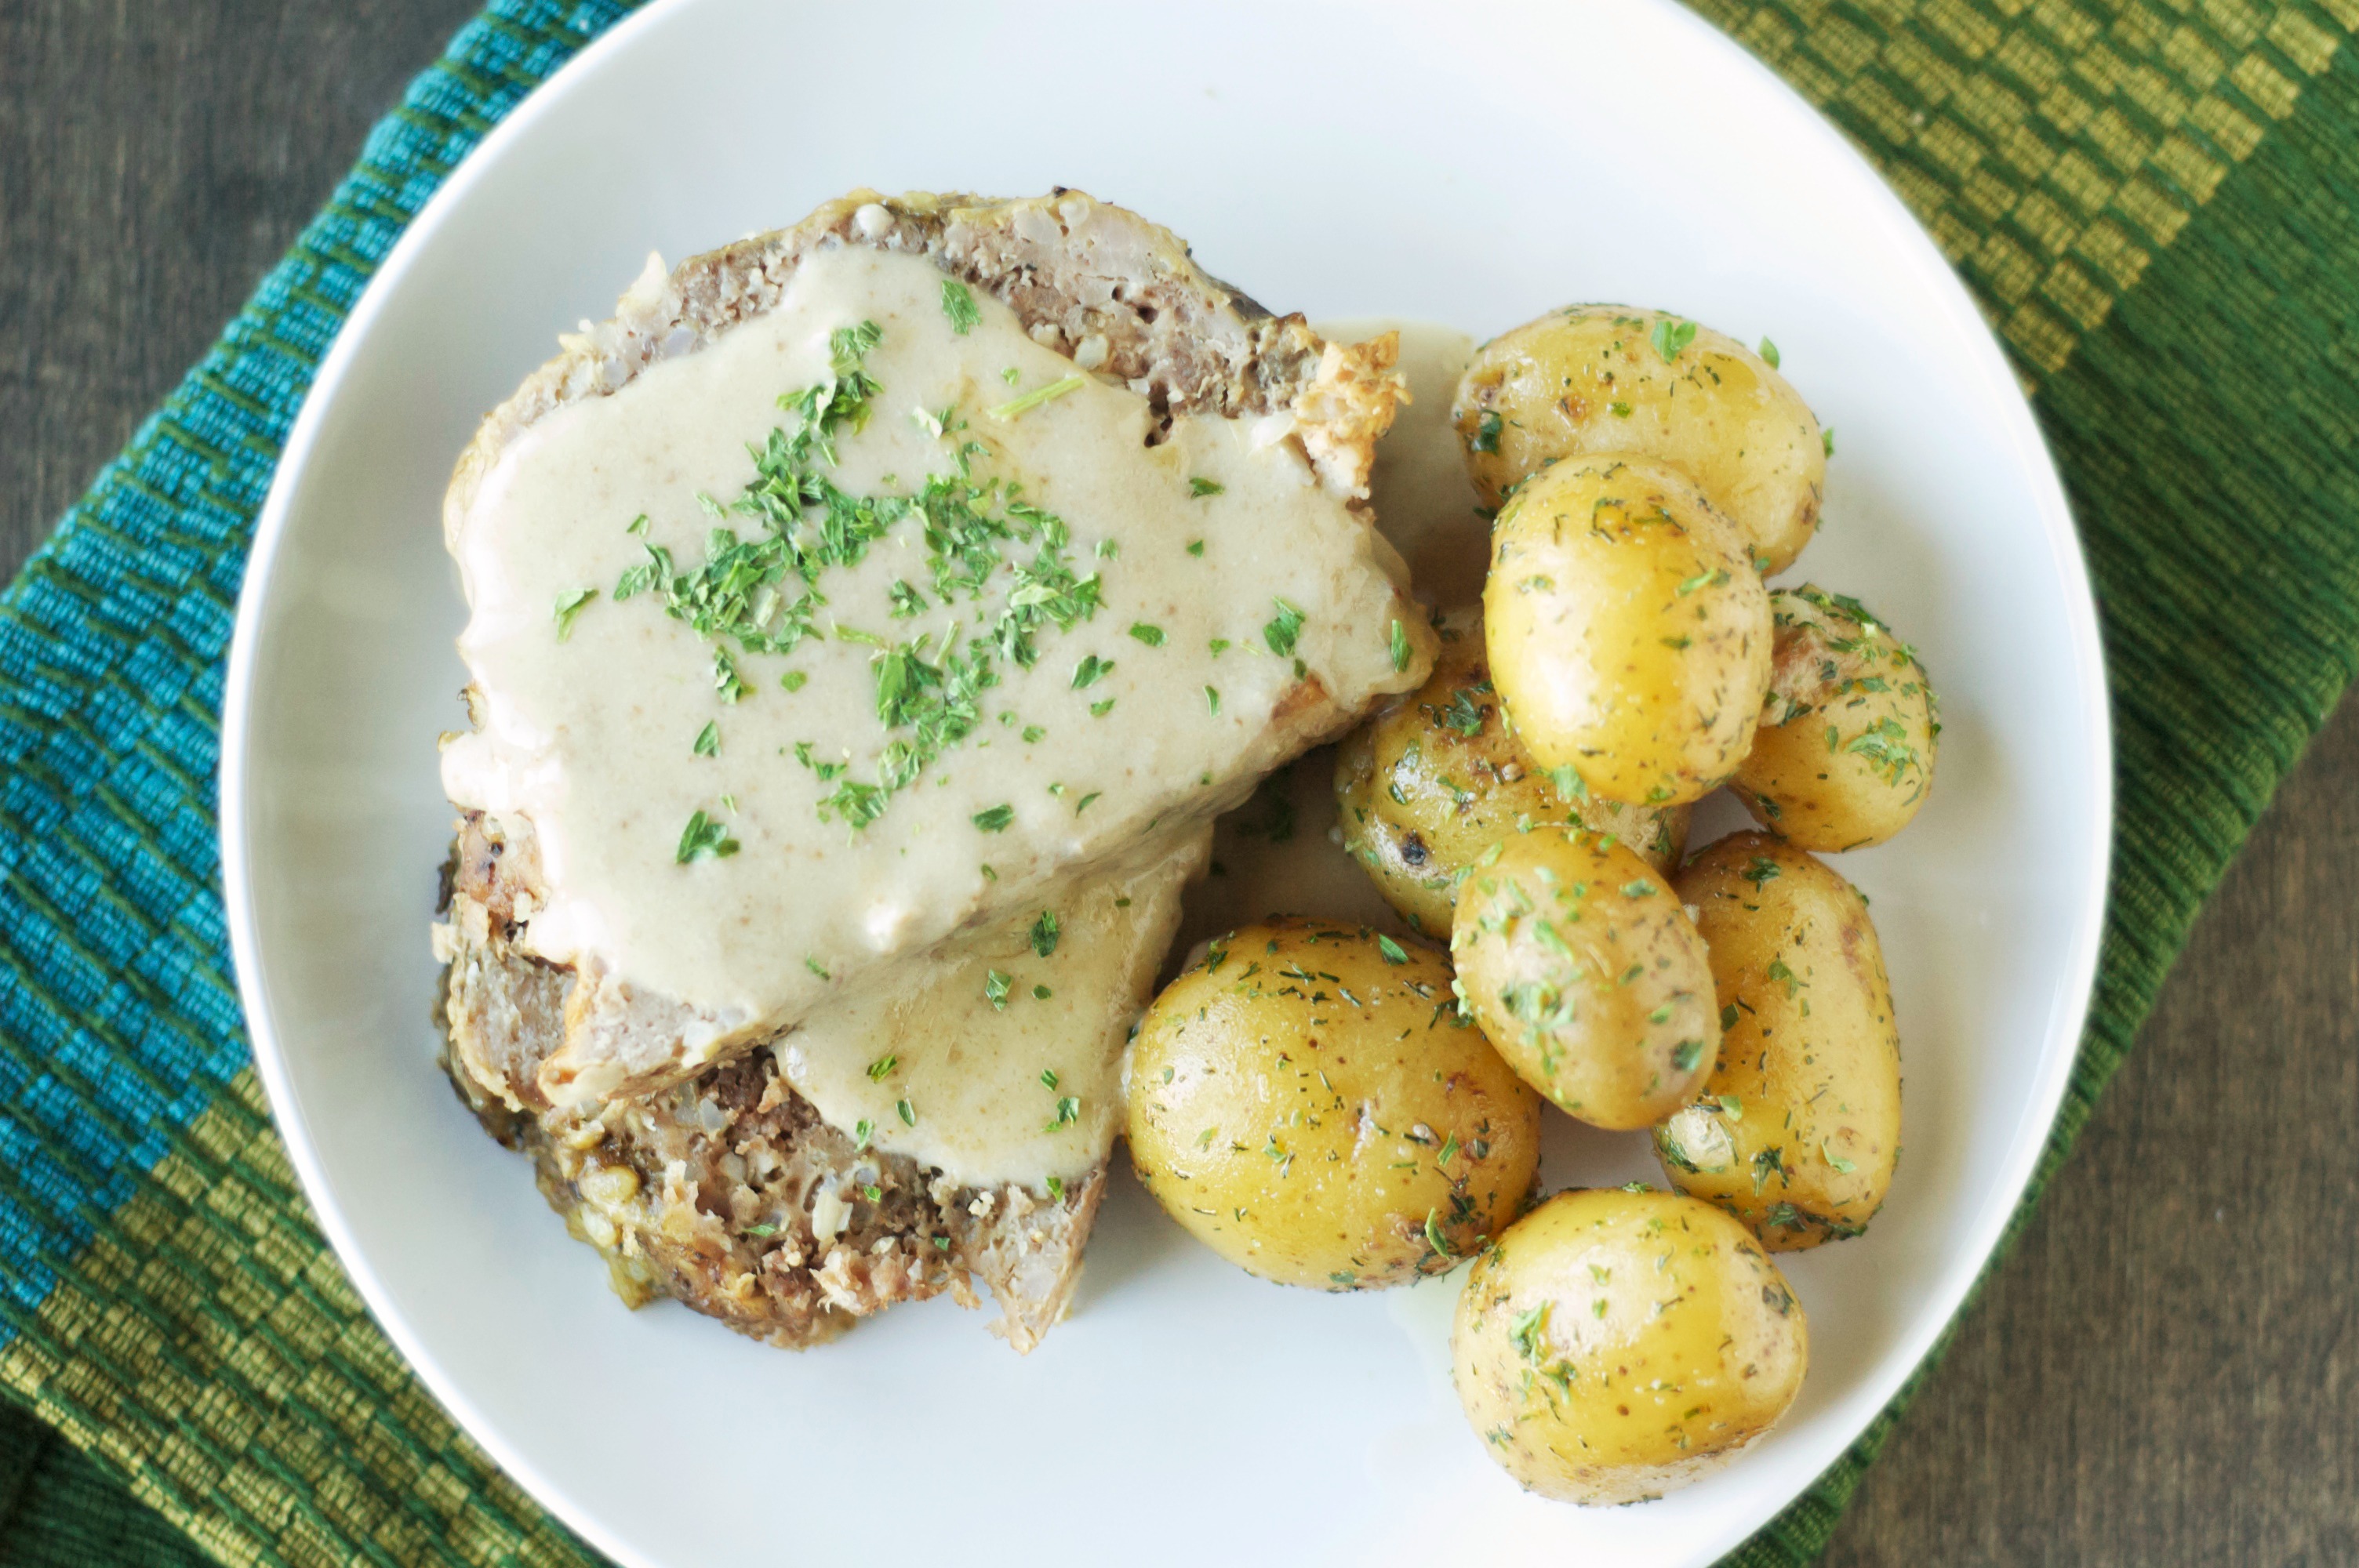 Top view of Slow Cooker Creamy Meatloaf with Baby Dill Potatoes on white plate